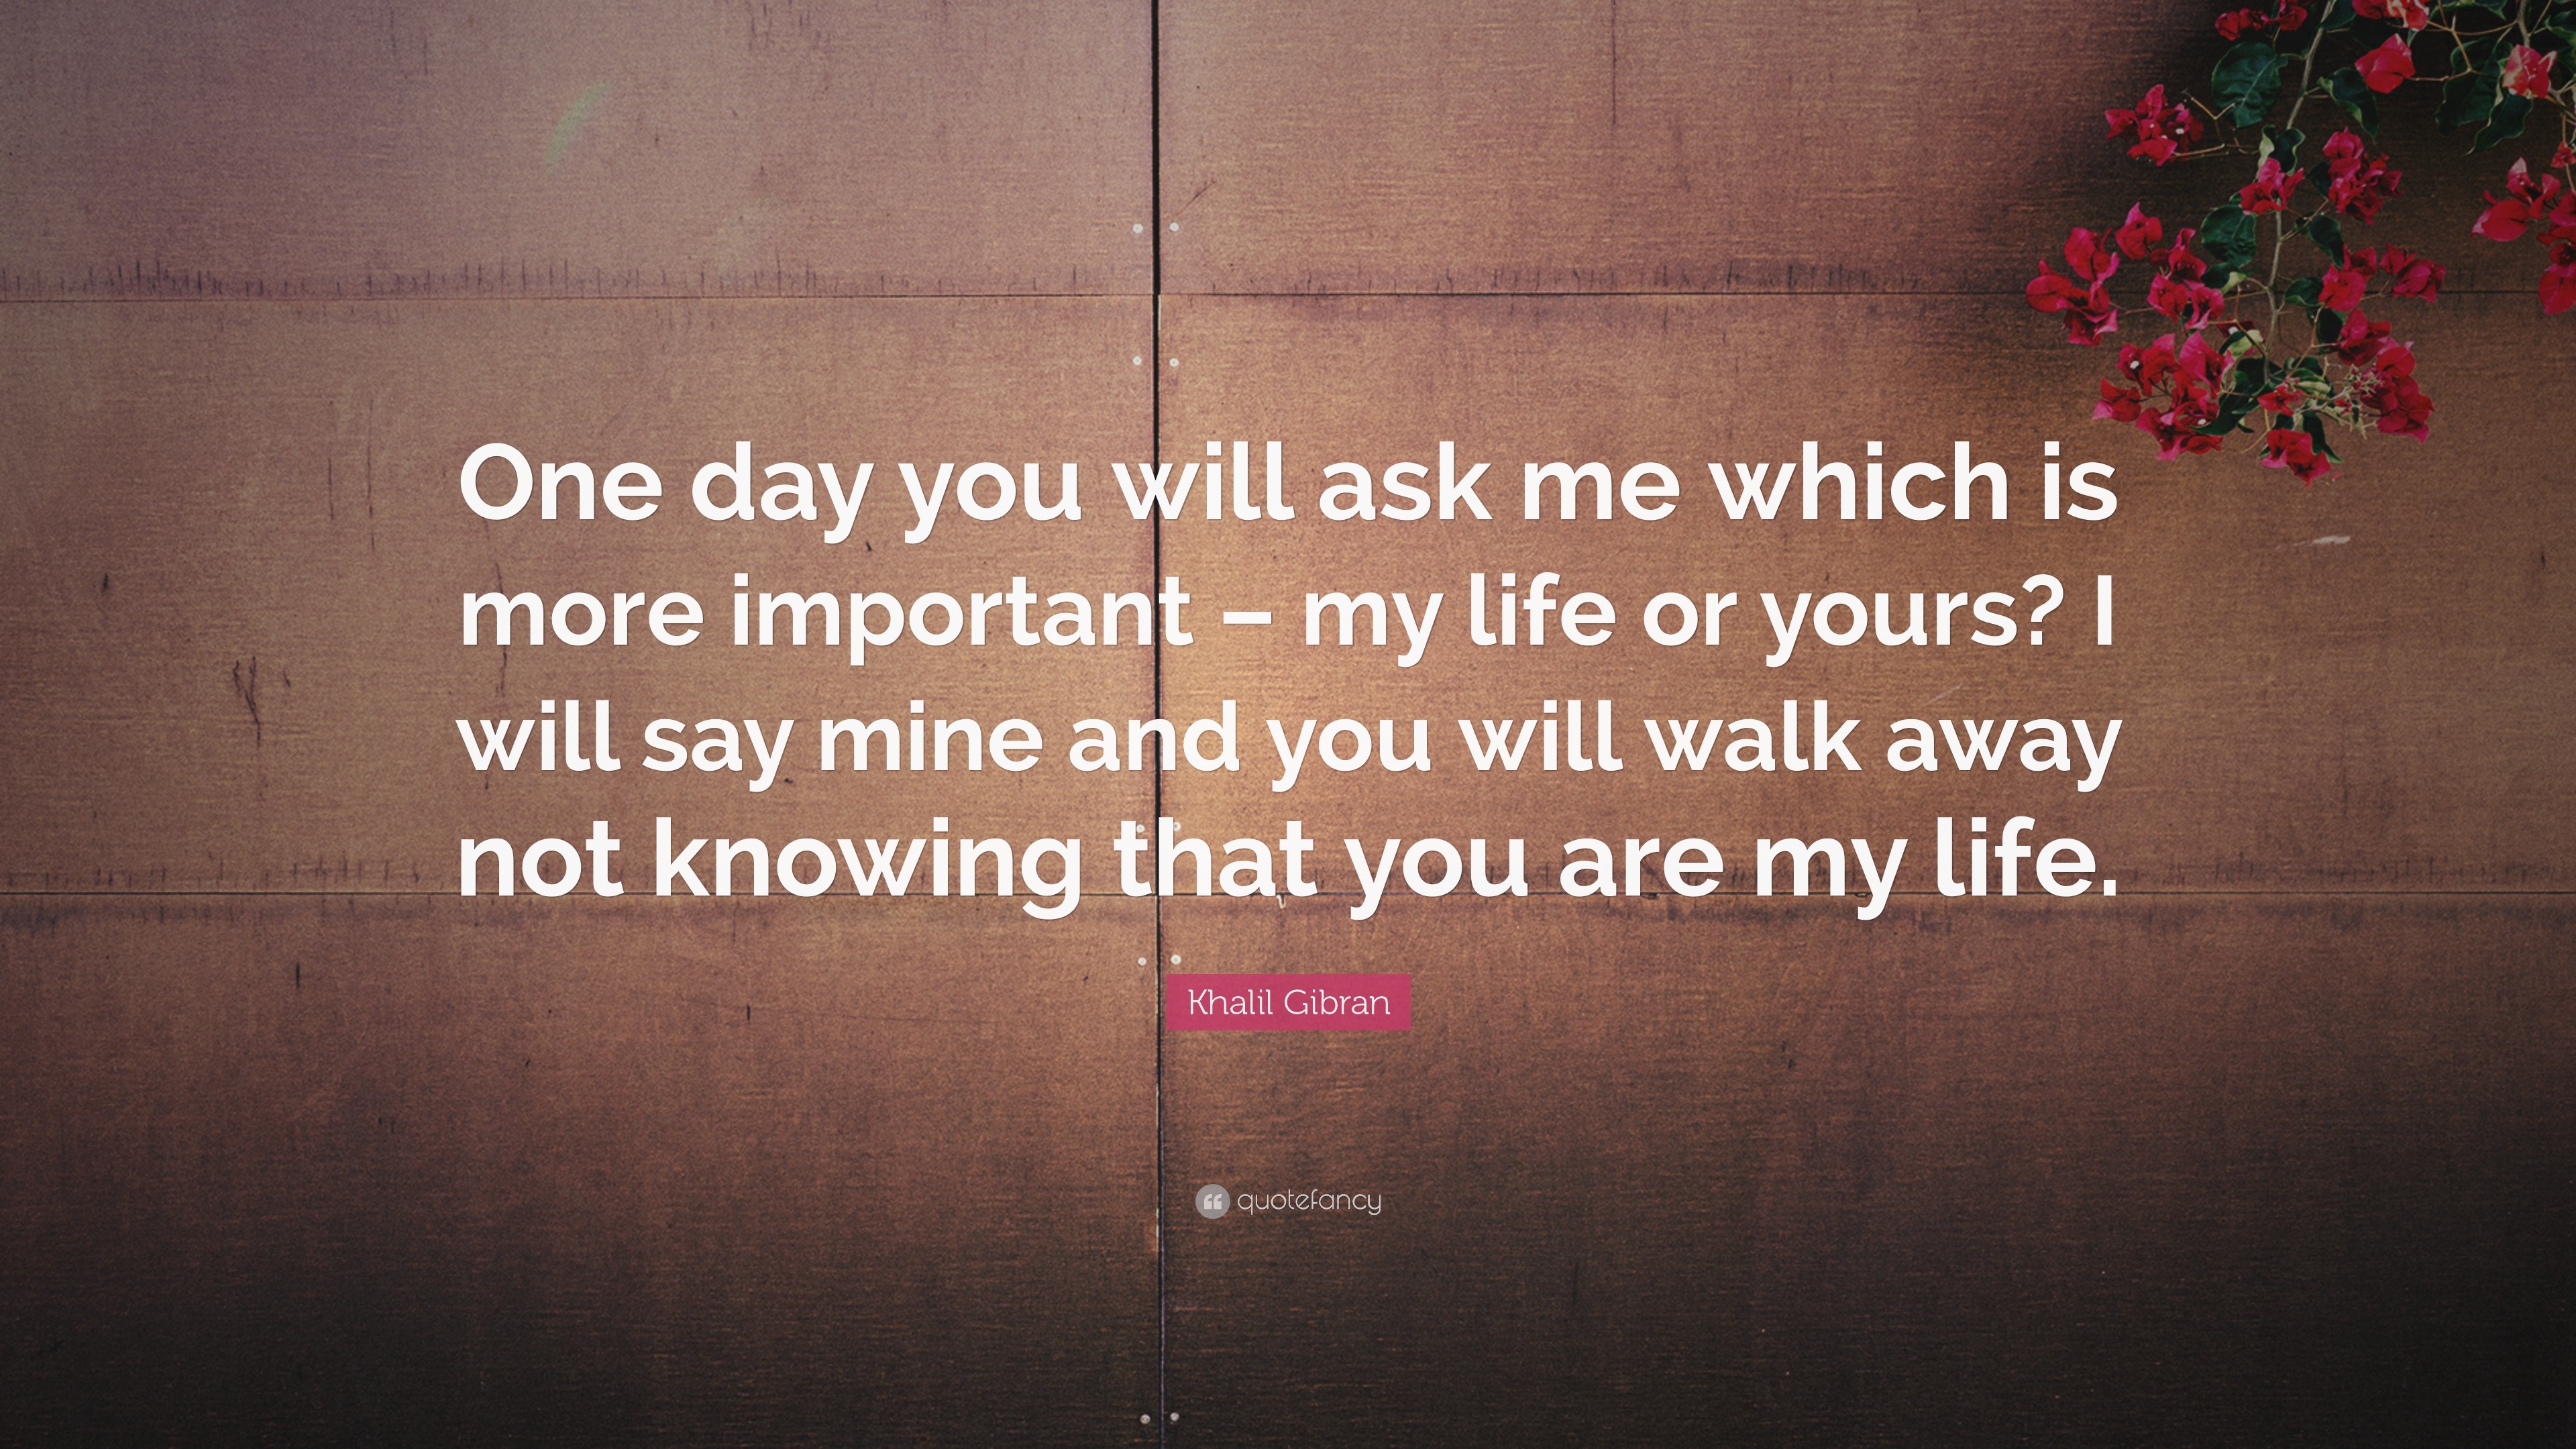 Khalil Gibran Quote “ e day you will ask me which is more important –